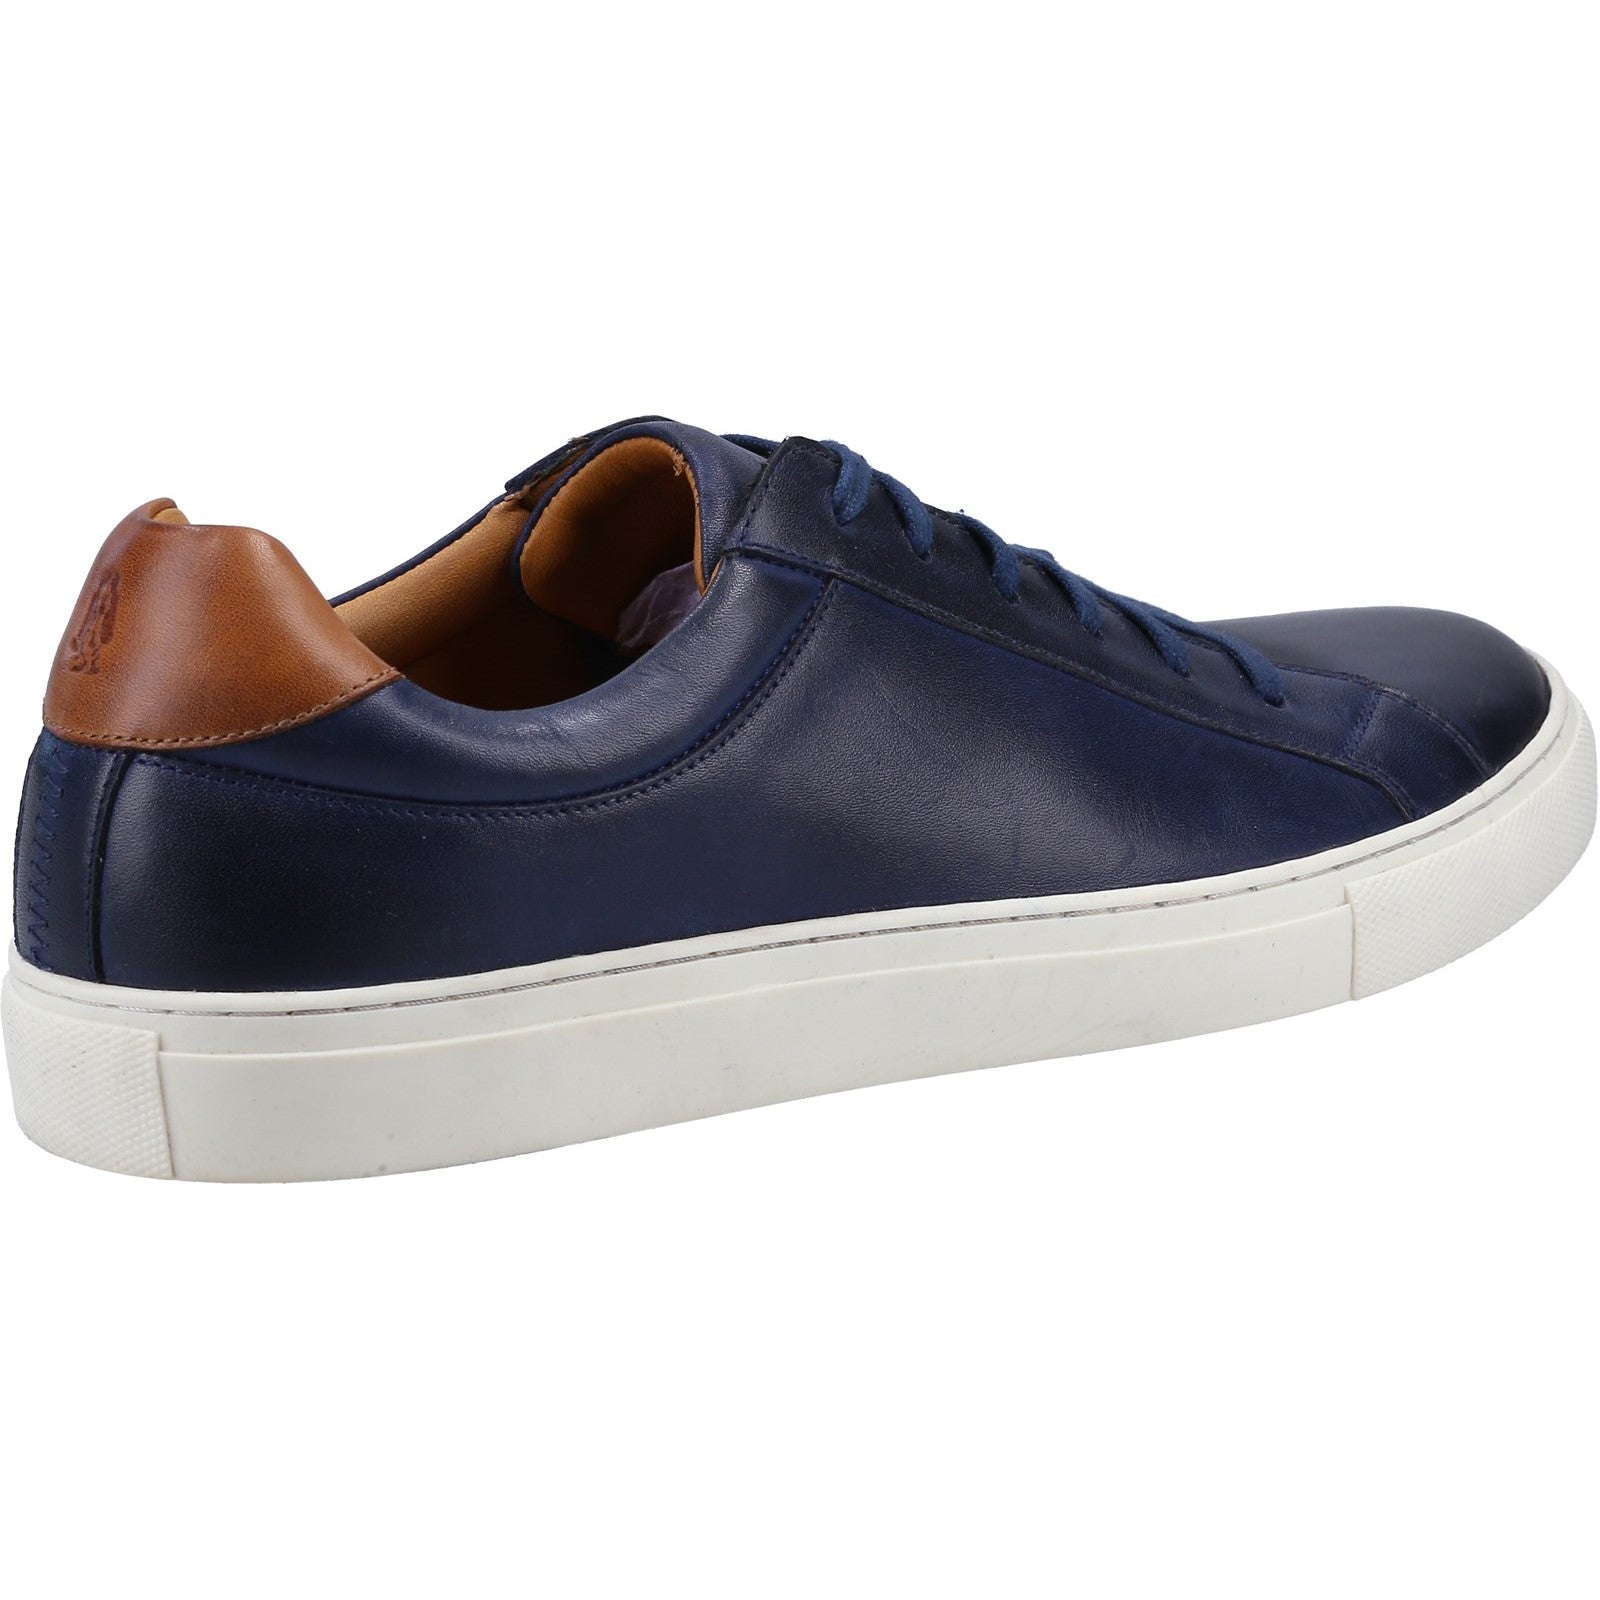 Hush Puppies Mens Colton Leather Trainers - Navy